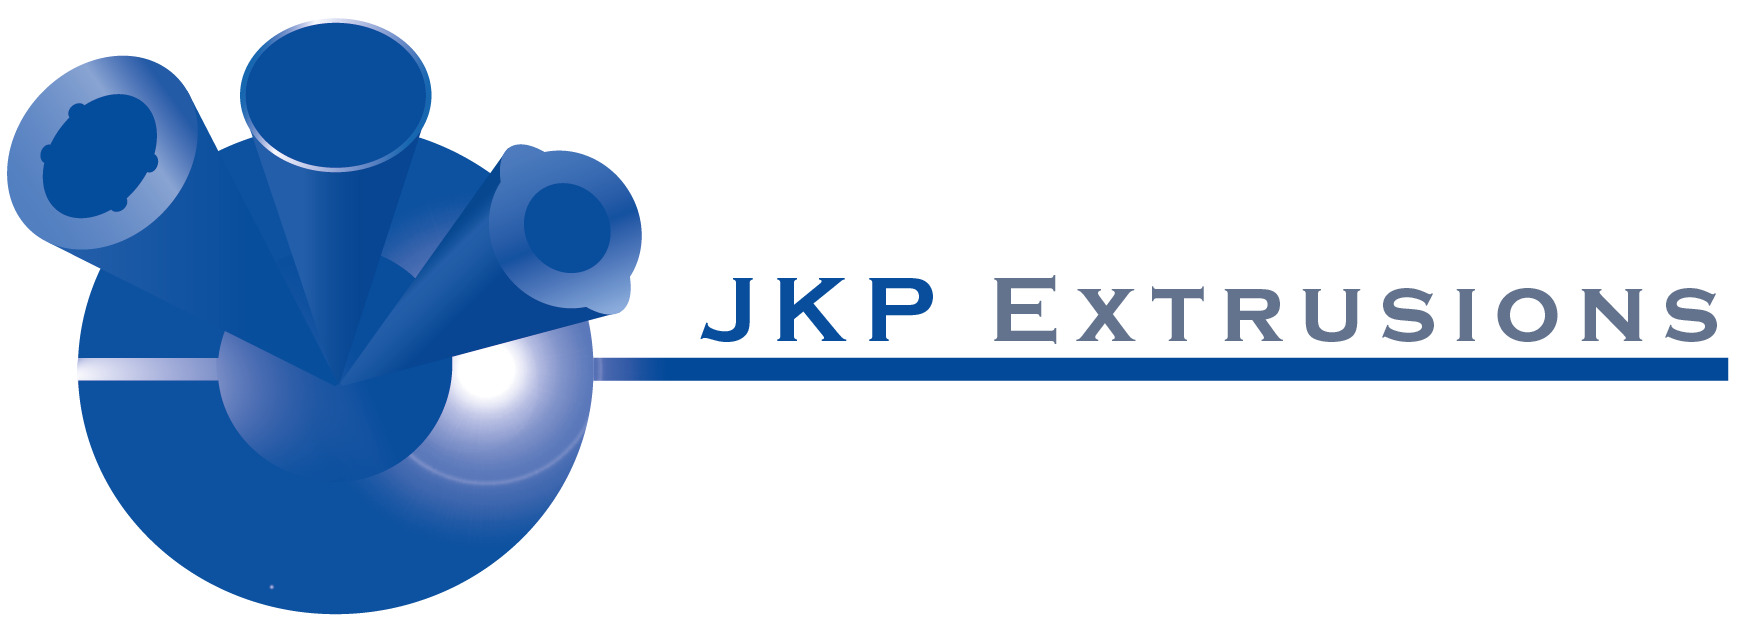 JKP EXTRUSIONS